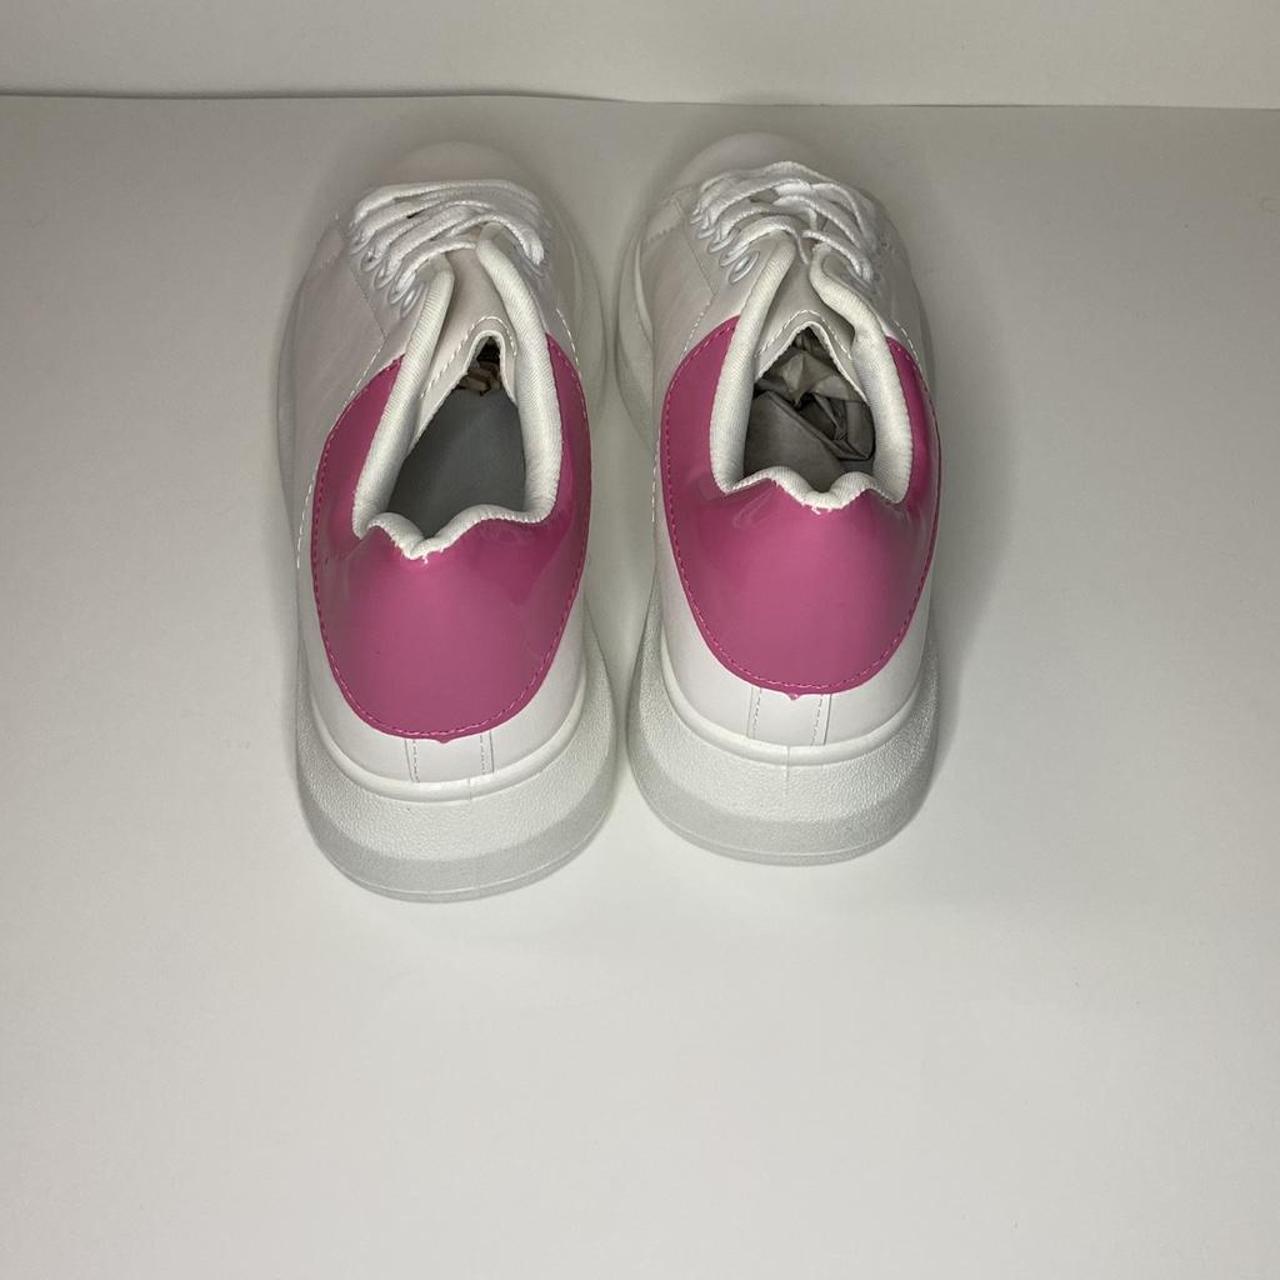 EGO Women's Pink and White Trainers (2)